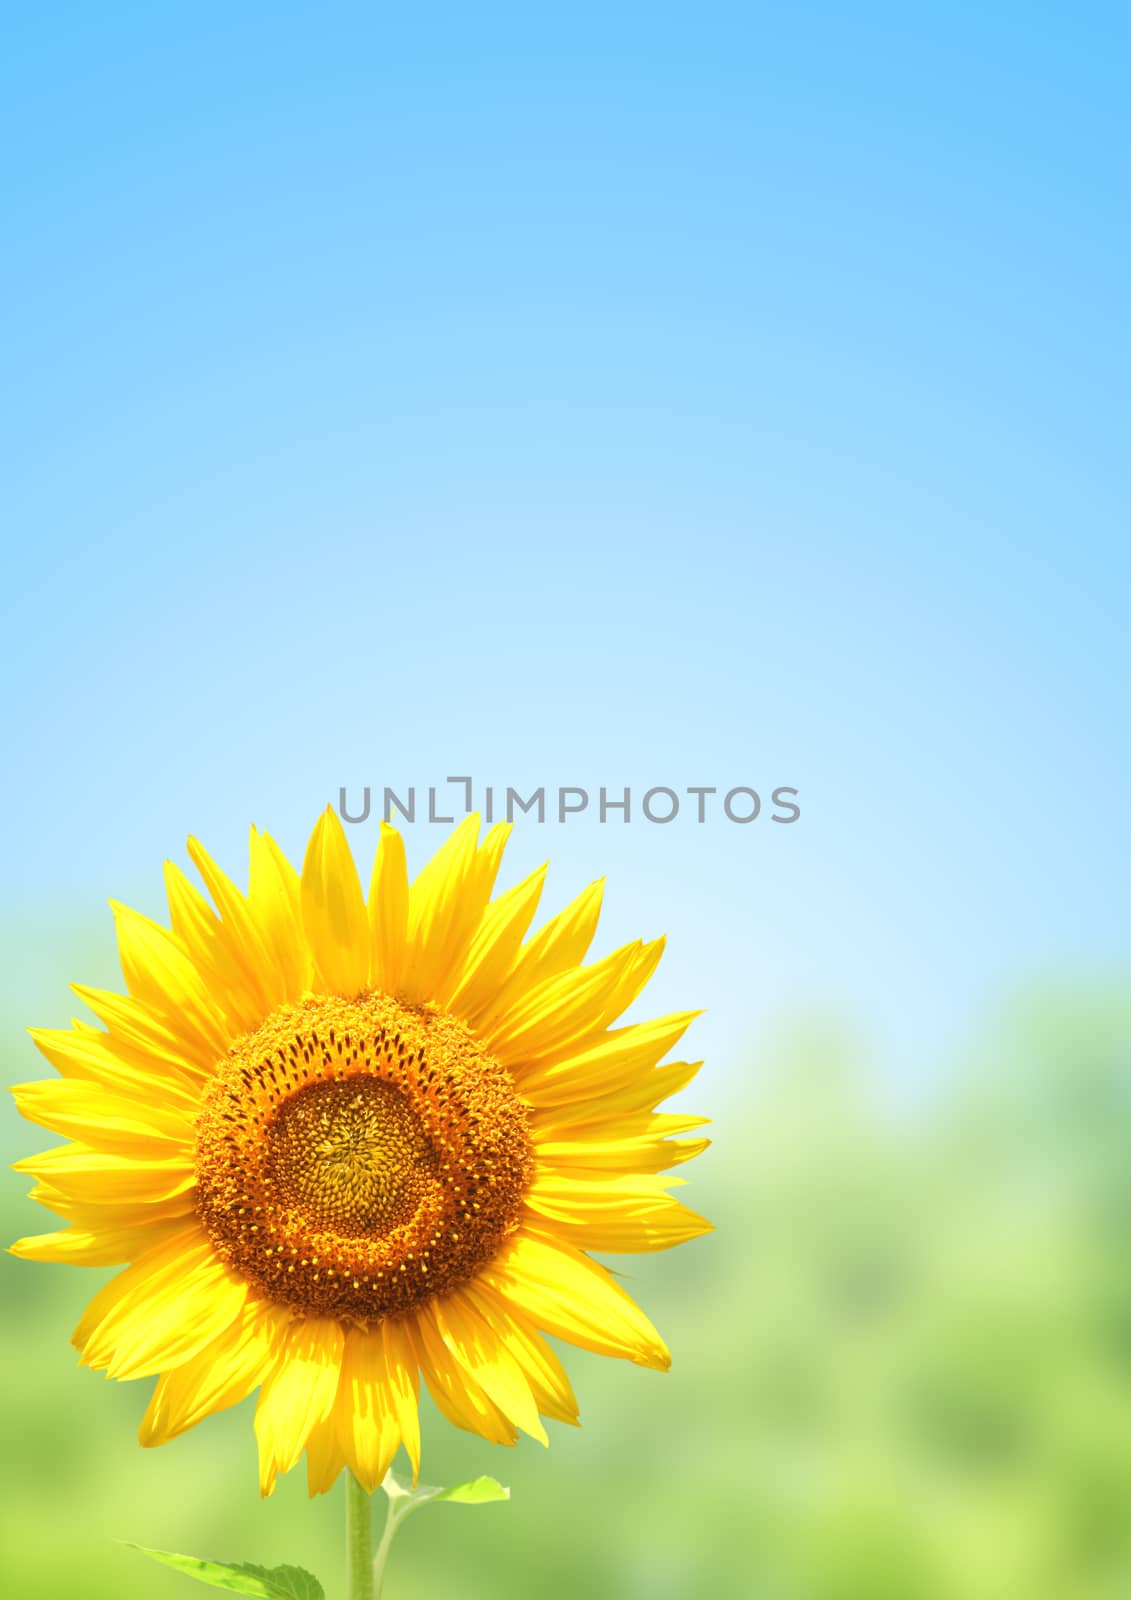 Yellow sunflower and blue sky